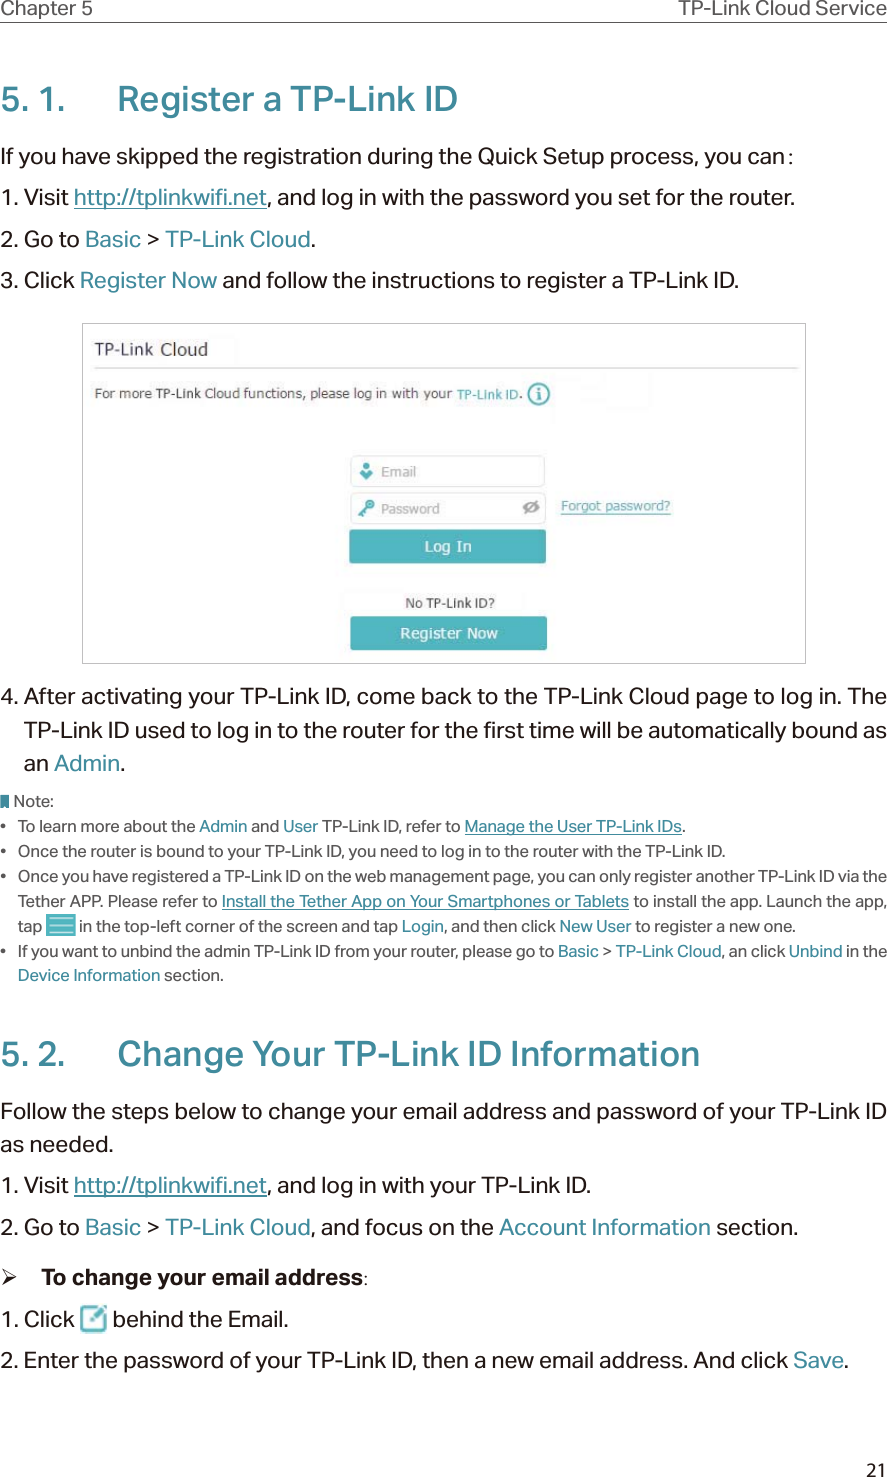 21Chapter 5 TP-Link Cloud Service5. 1.  Register a TP-Link IDIf you have skipped the registration during the Quick Setup process, you can：1. Visit http://tplinkwifi.net, and log in with the password you set for the router.2. Go to Basic &gt; TP-Link Cloud.3. Click Register Now and follow the instructions to register a TP-Link ID.4. After activating your TP-Link ID, come back to the TP-Link Cloud page to log in. The TP-Link ID used to log in to the router for the first time will be automatically bound as an Admin. Note:•  To learn more about the Admin and User TP-Link ID, refer to Manage the User TP-Link IDs.•  Once the router is bound to your TP-Link ID, you need to log in to the router with the TP-Link ID. •  Once you have registered a TP-Link ID on the web management page, you can only register another TP-Link ID via the Tether APP. Please refer to Install the Tether App on Your Smartphones or Tablets to install the app. Launch the app, tap   in the top-left corner of the screen and tap Login, and then click New User to register a new one.•  If you want to unbind the admin TP-Link ID from your router, please go to Basic &gt; TP-Link Cloud, an click Unbind in the Device Information section.5. 2.  Change Your TP-Link ID InformationFollow the steps below to change your email address and password of your TP-Link ID as needed.1. Visit http://tplinkwifi.net, and log in with your TP-Link ID.2. Go to Basic &gt; TP-Link Cloud, and focus on the Account Information section. ¾To change your email address:1. Click   behind the Email.2. Enter the password of your TP-Link ID, then a new email address. And click Save.